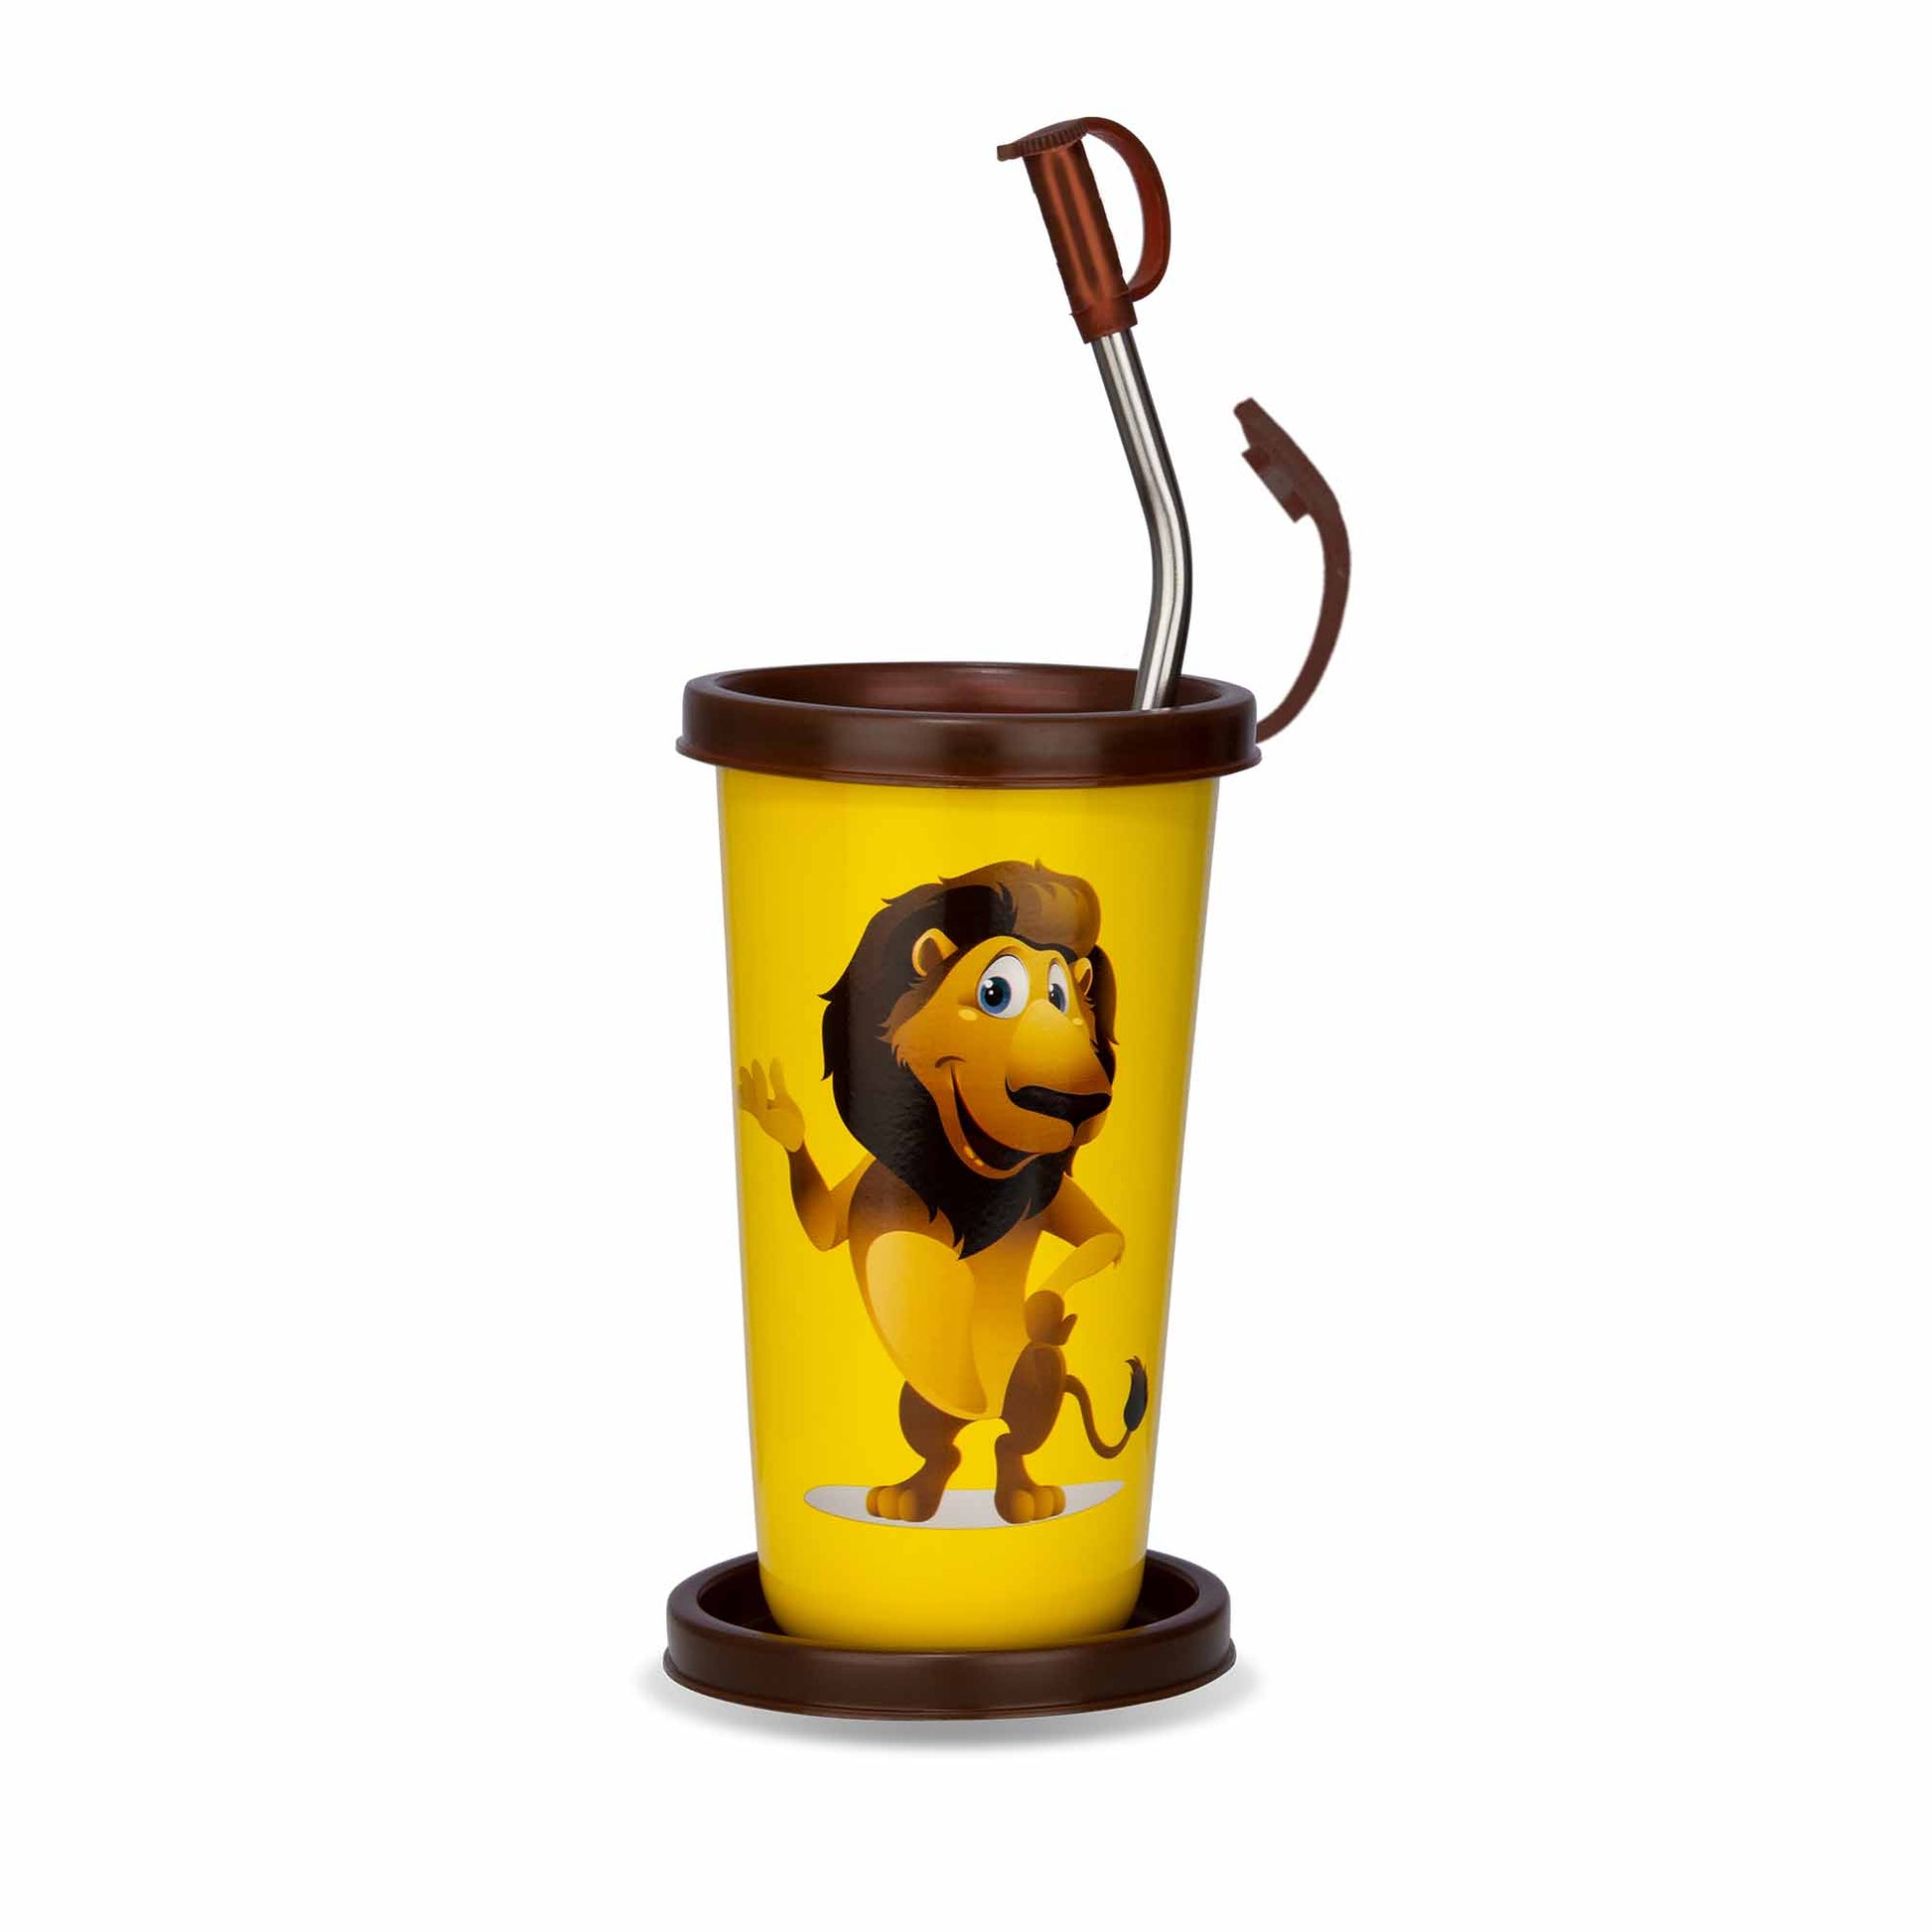 PddFalcon Stainless Steel Sipper Cartoon Strawglass With Accessories CN3 370ml